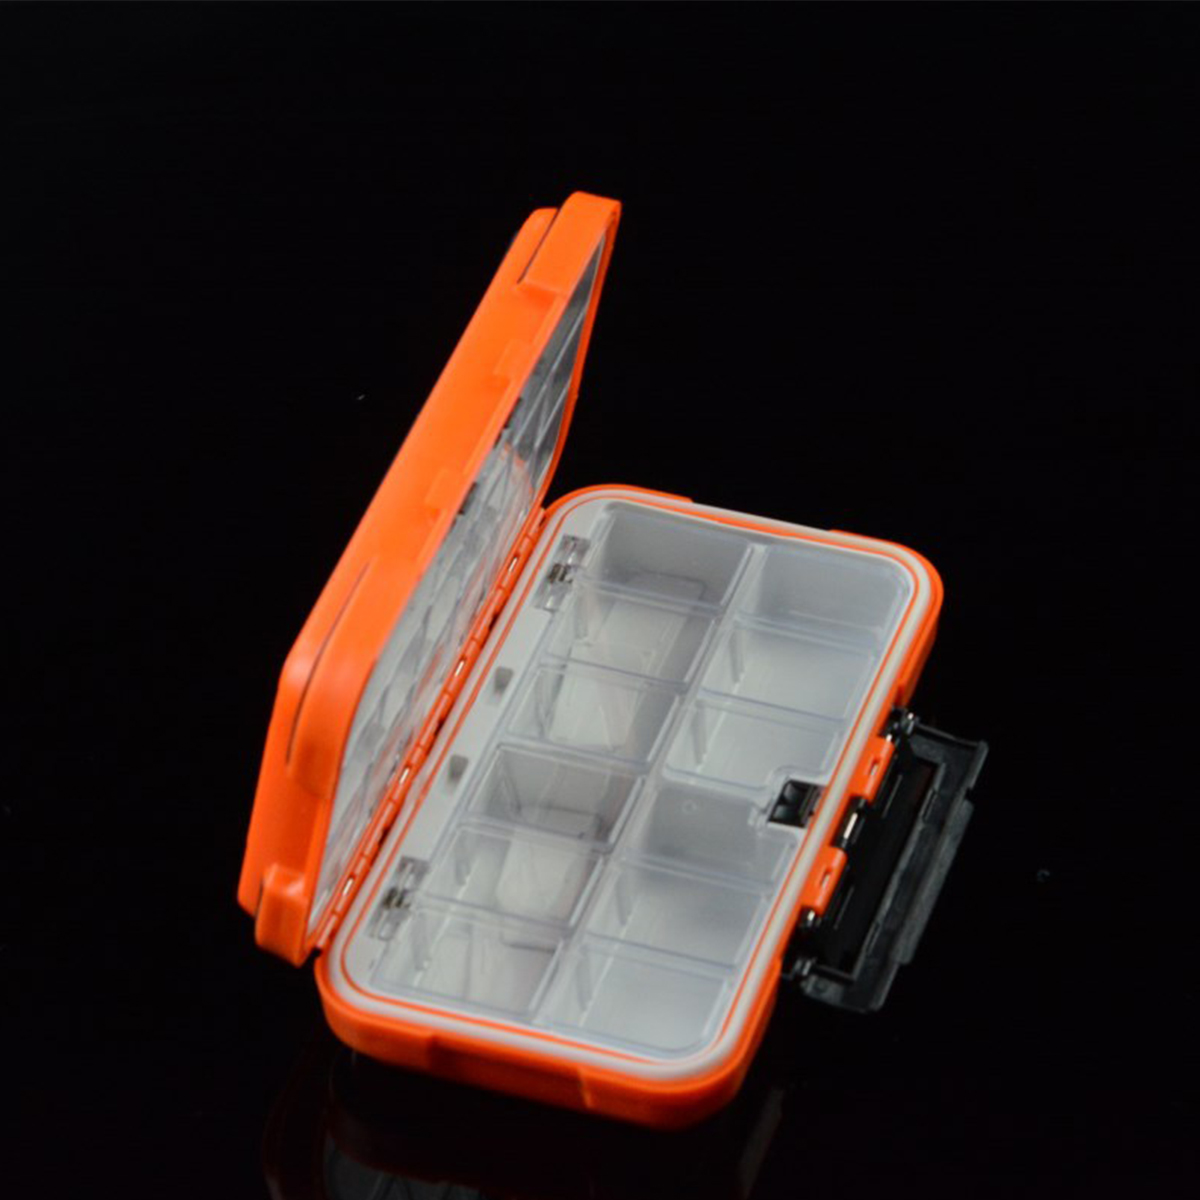 Sealed-Waterproof-Fishing-Tackle-Tray-ABS-Plastic-Fishing-Accessories-Box-Swivel-Snap-Lure--Parts-St-1634862-7